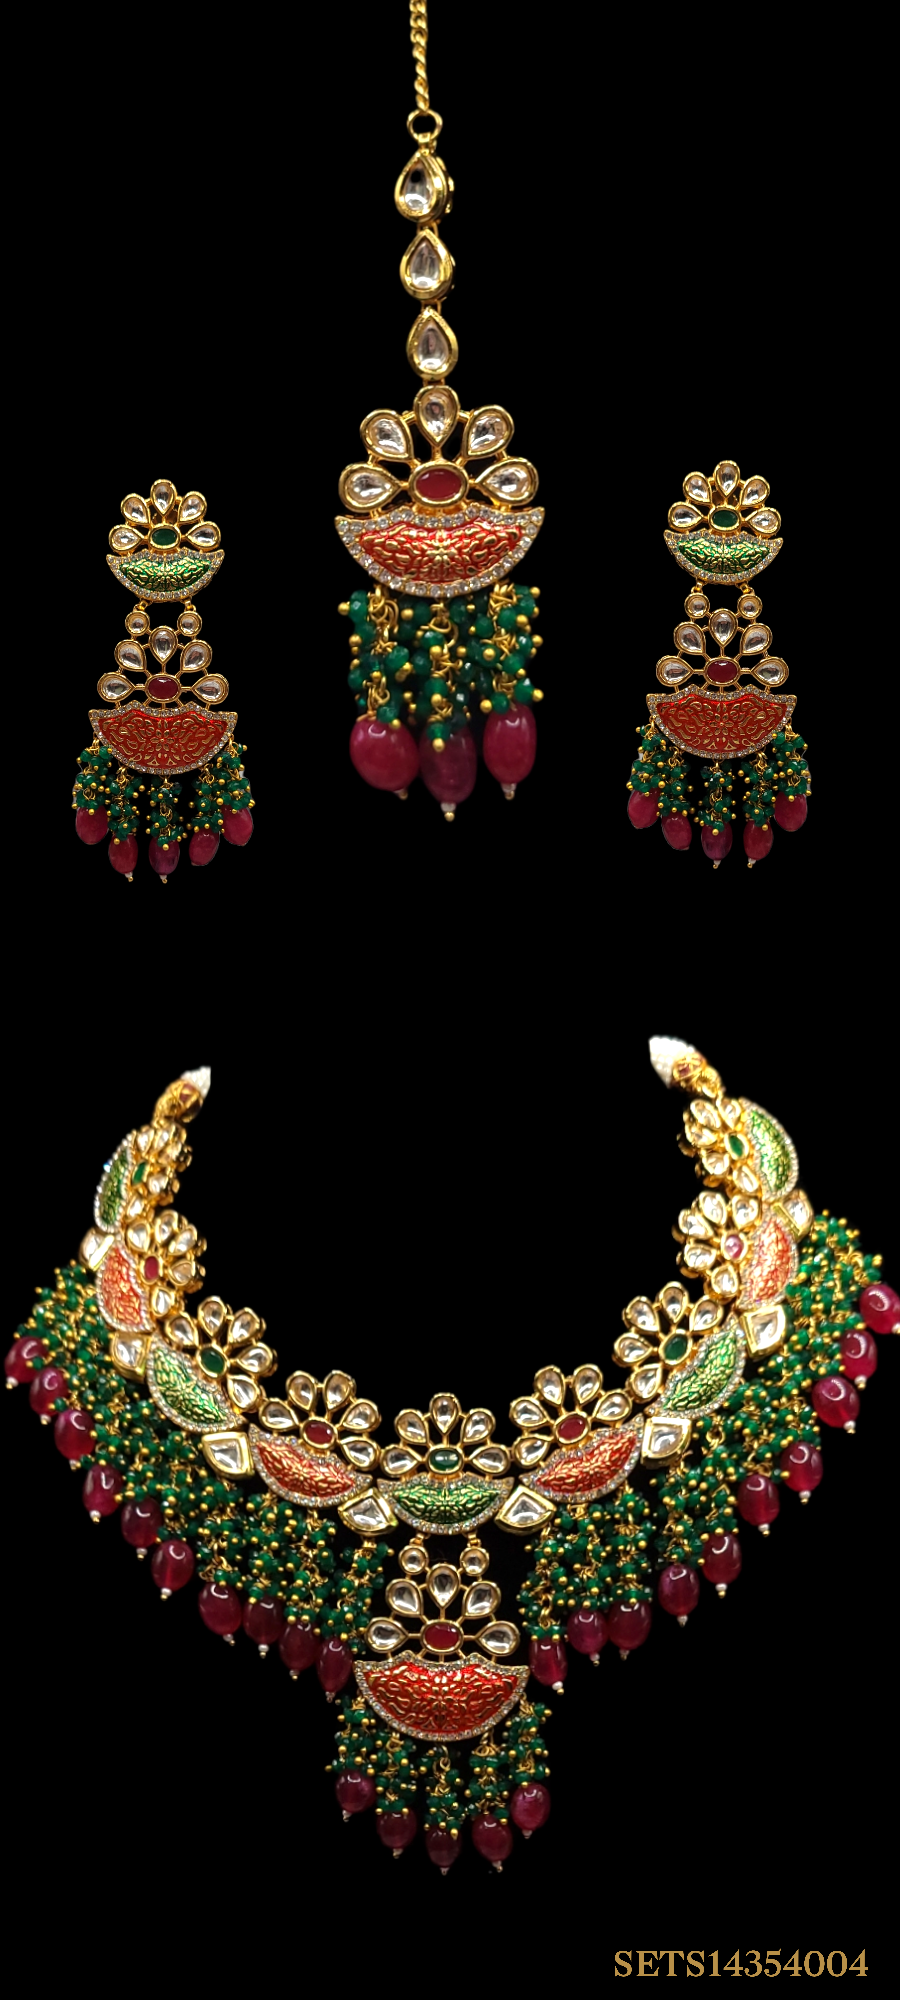 ADORABLE & ELEGANT 4 PIECE SET IN GOLD, GREEN, RED BEADS COLOR (BEADED NECKLACE, EARRINGS & HEAD PIECE)